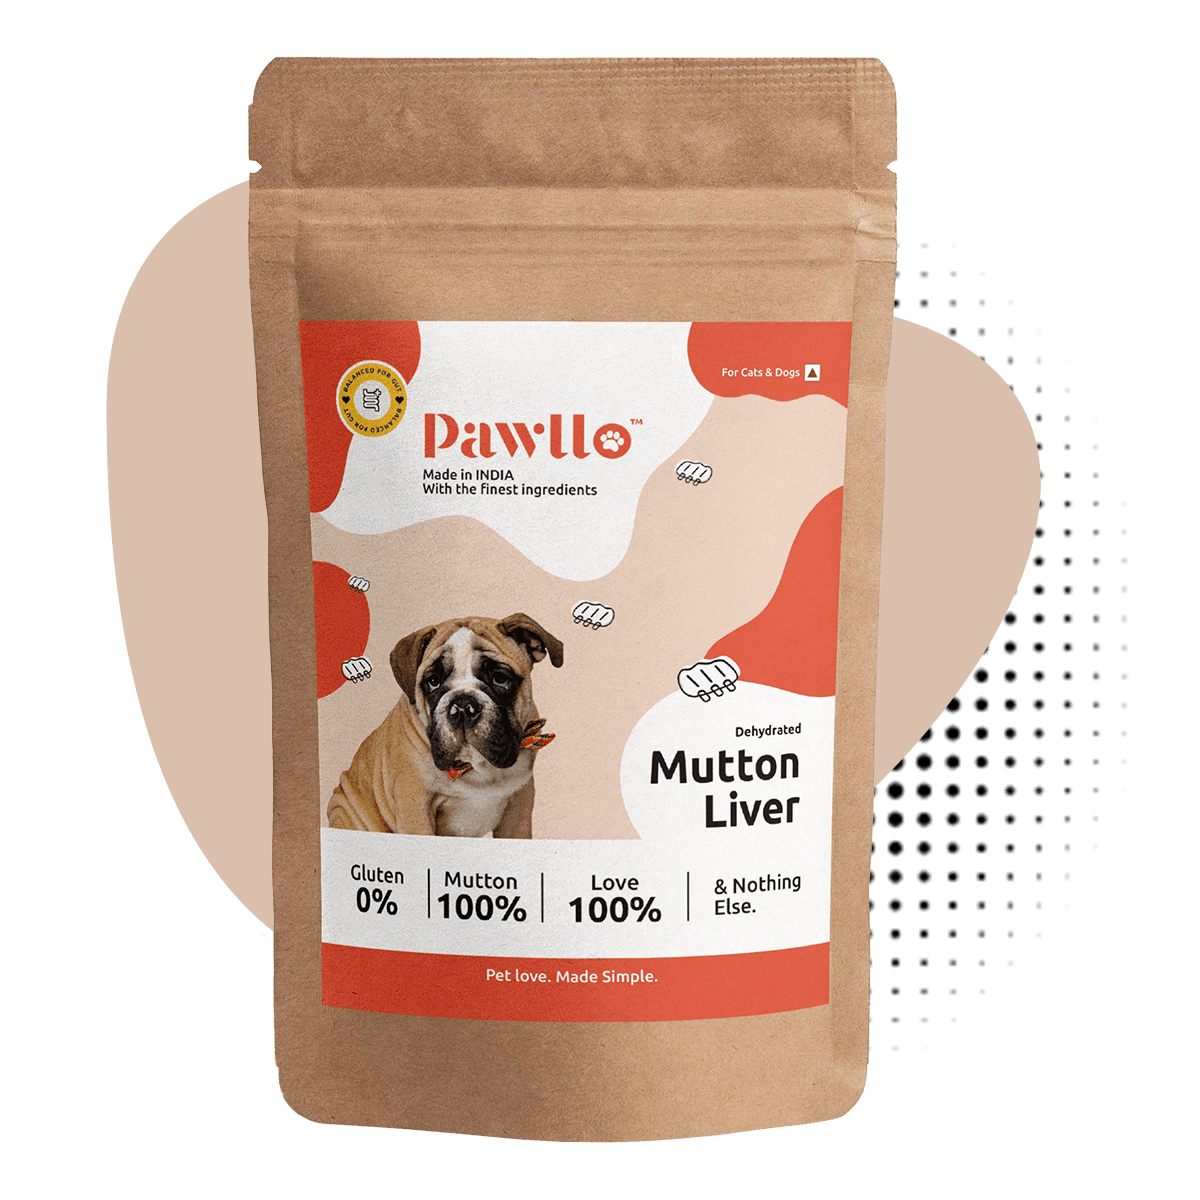 Mutton Liver - Boneless Dehydrated Natural Protein Loaded Snack for Cats and Dogs - 100% Mutton